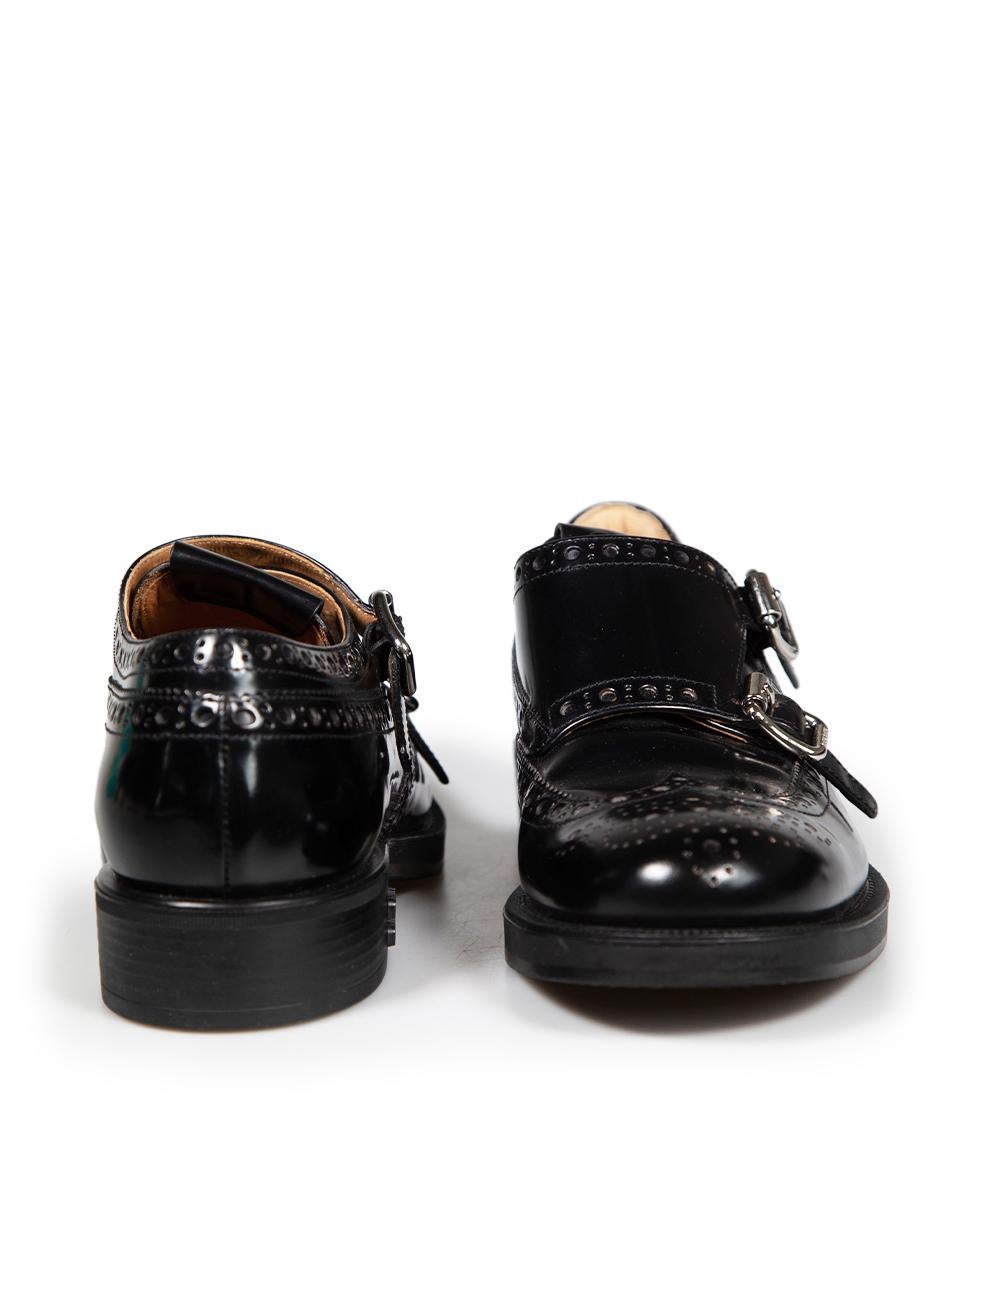 Miu Miu Black Leather Double Monk Brogues Size IT 38 In Excellent Condition For Sale In London, GB